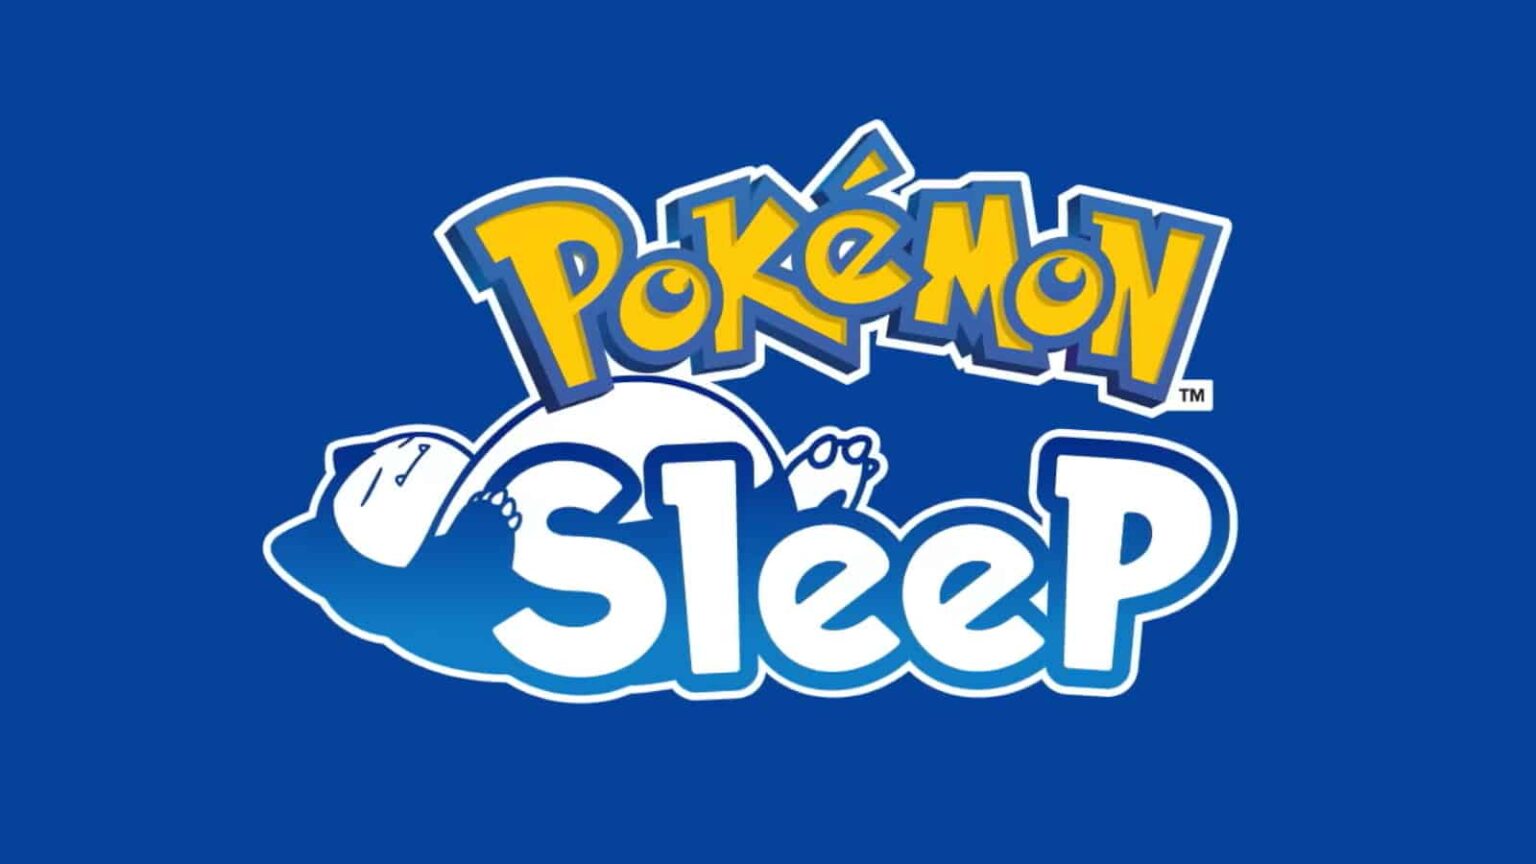 With this app you can catch pokemon just by sleeping